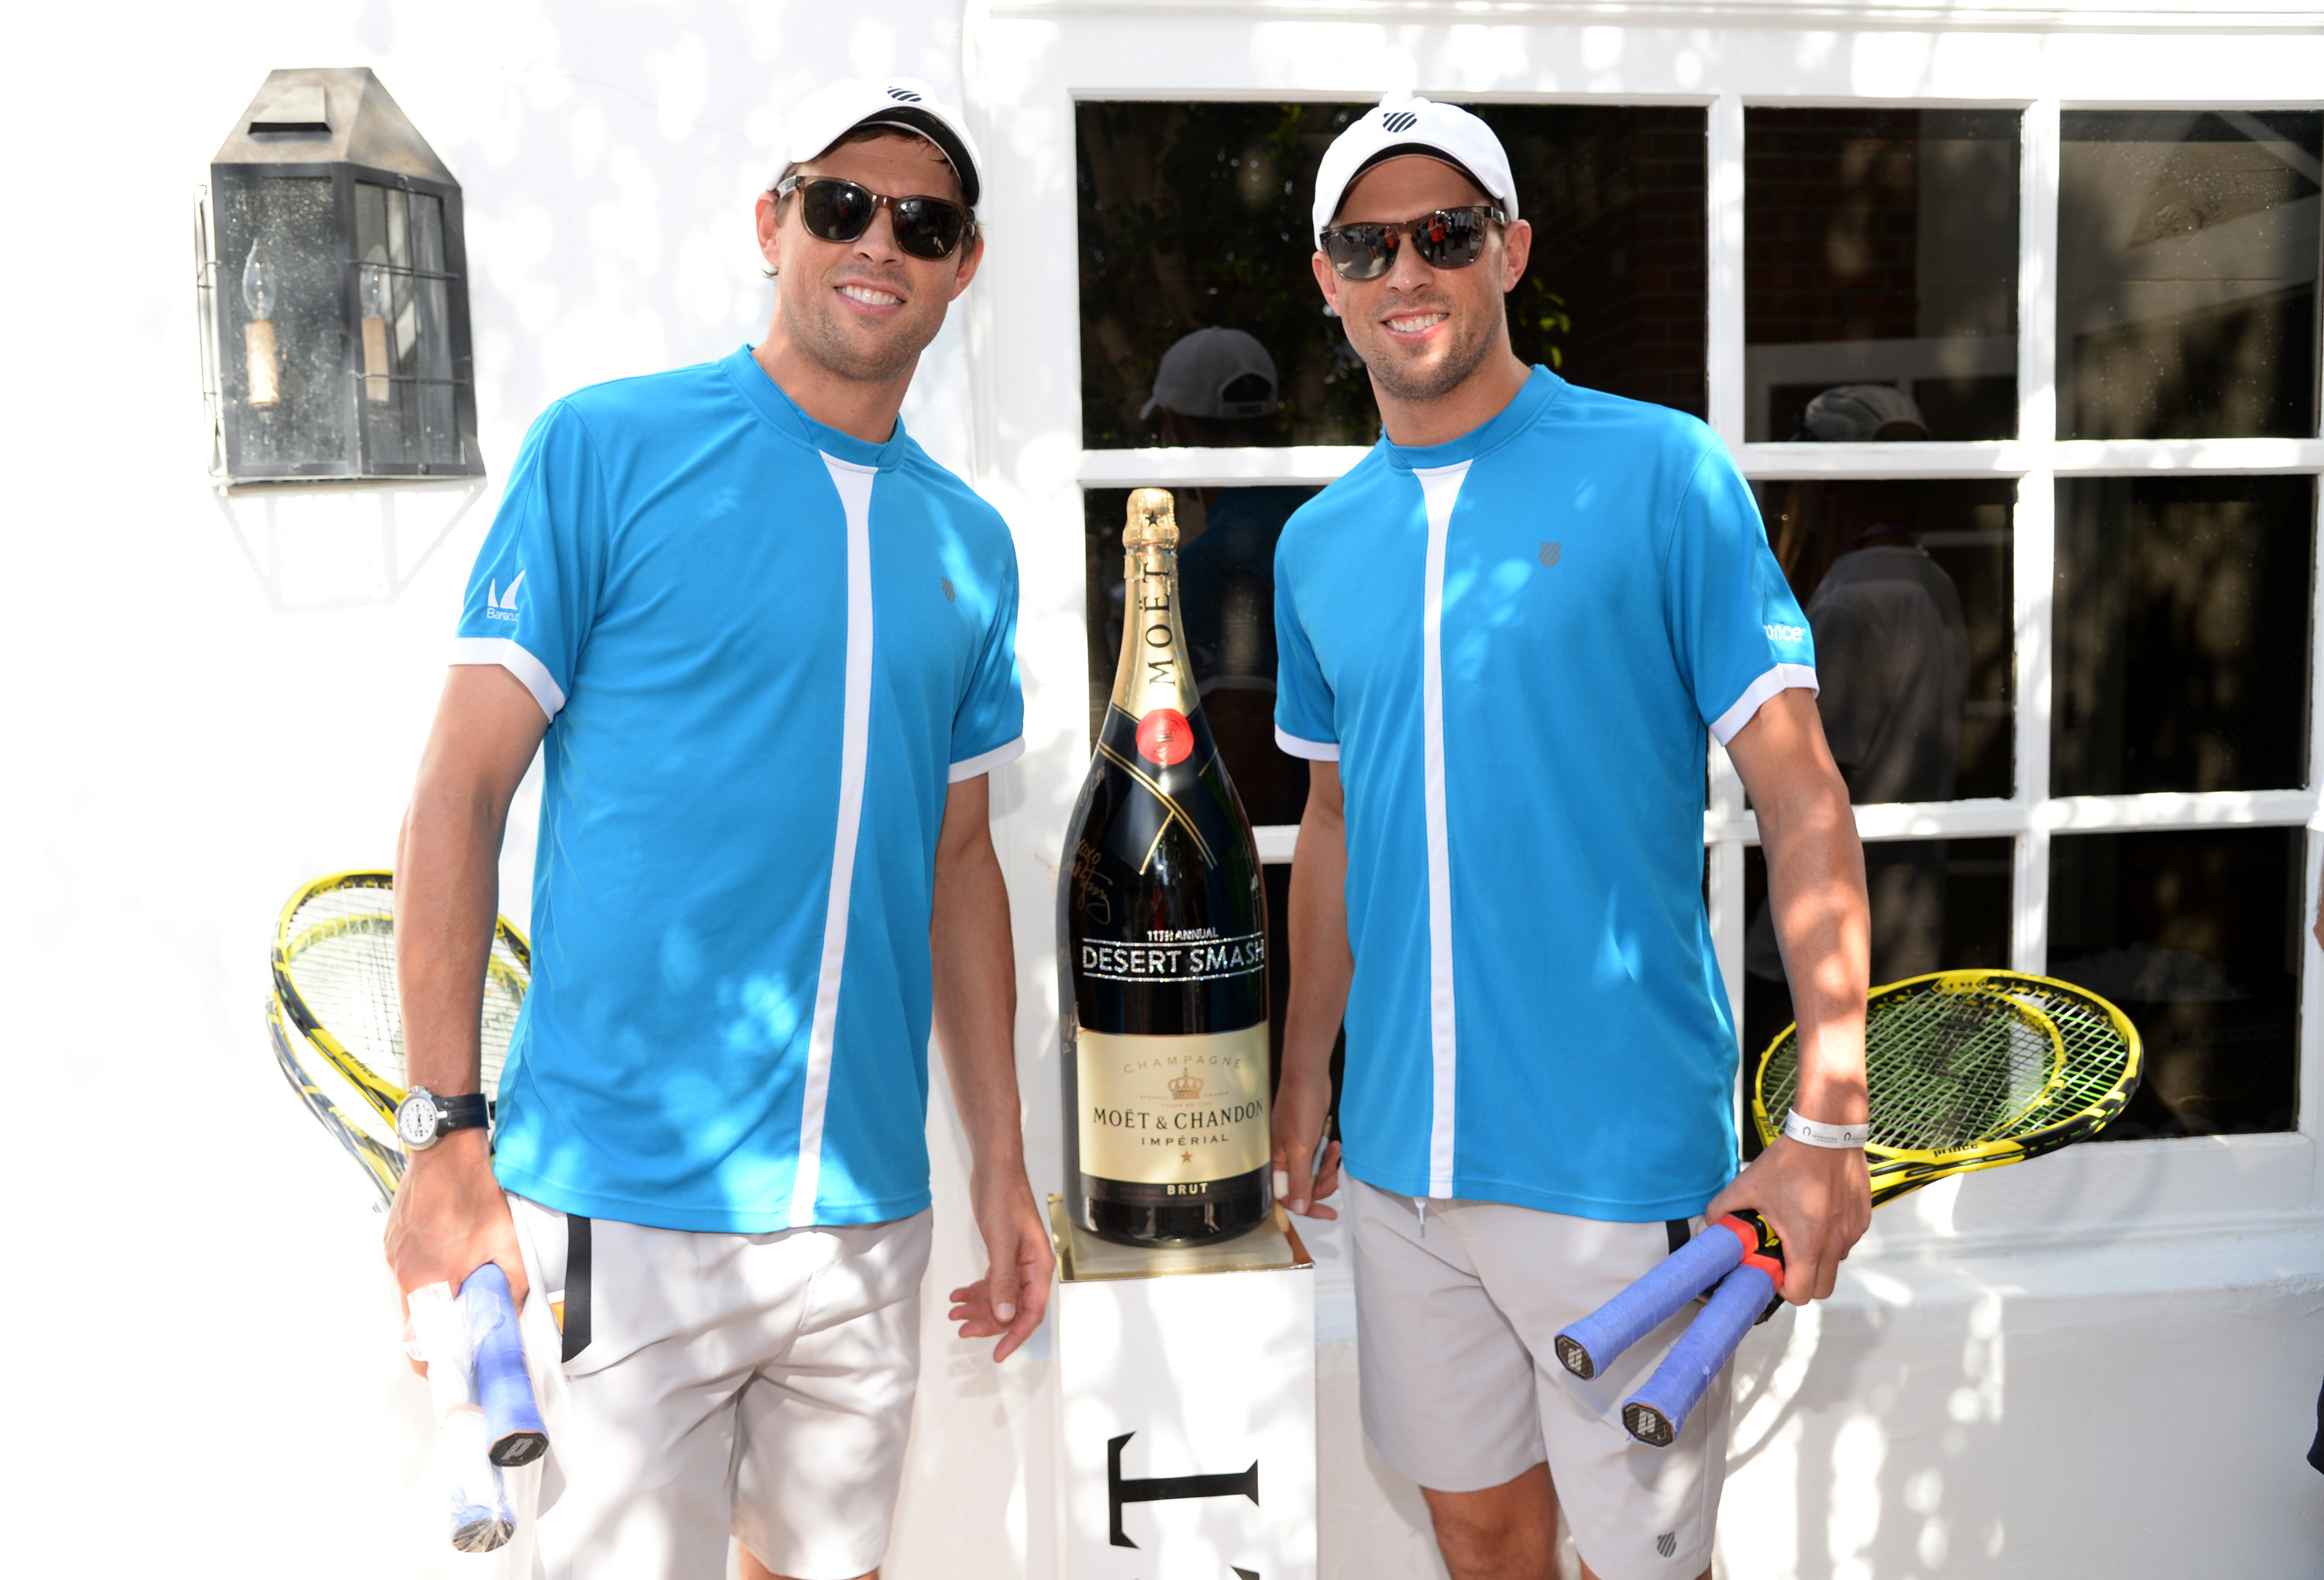 Tennis players Bob and Mike Bryan celebrate with Moet & Chandon at the 11th annual Desert Smash at La Quinta Resort and Club